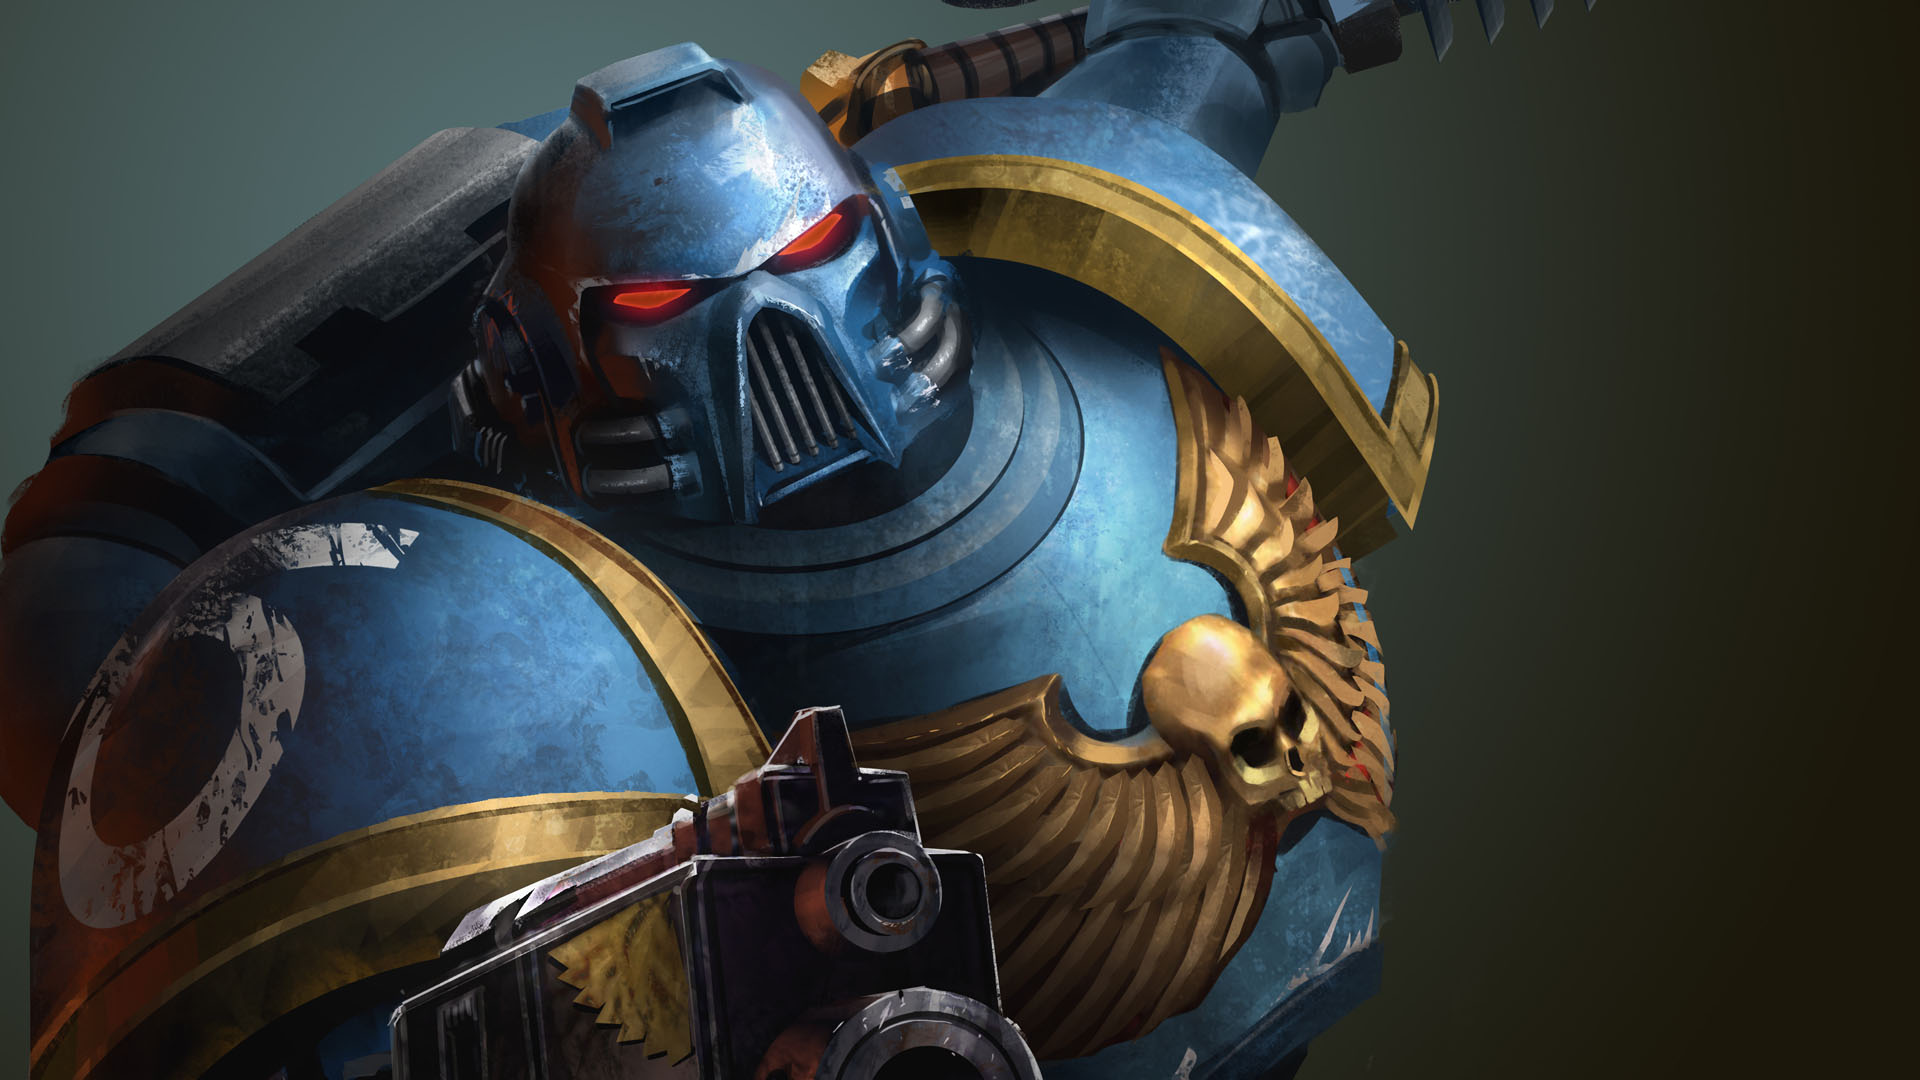 download the new for android Warhammer 40,000: Space Marine 2